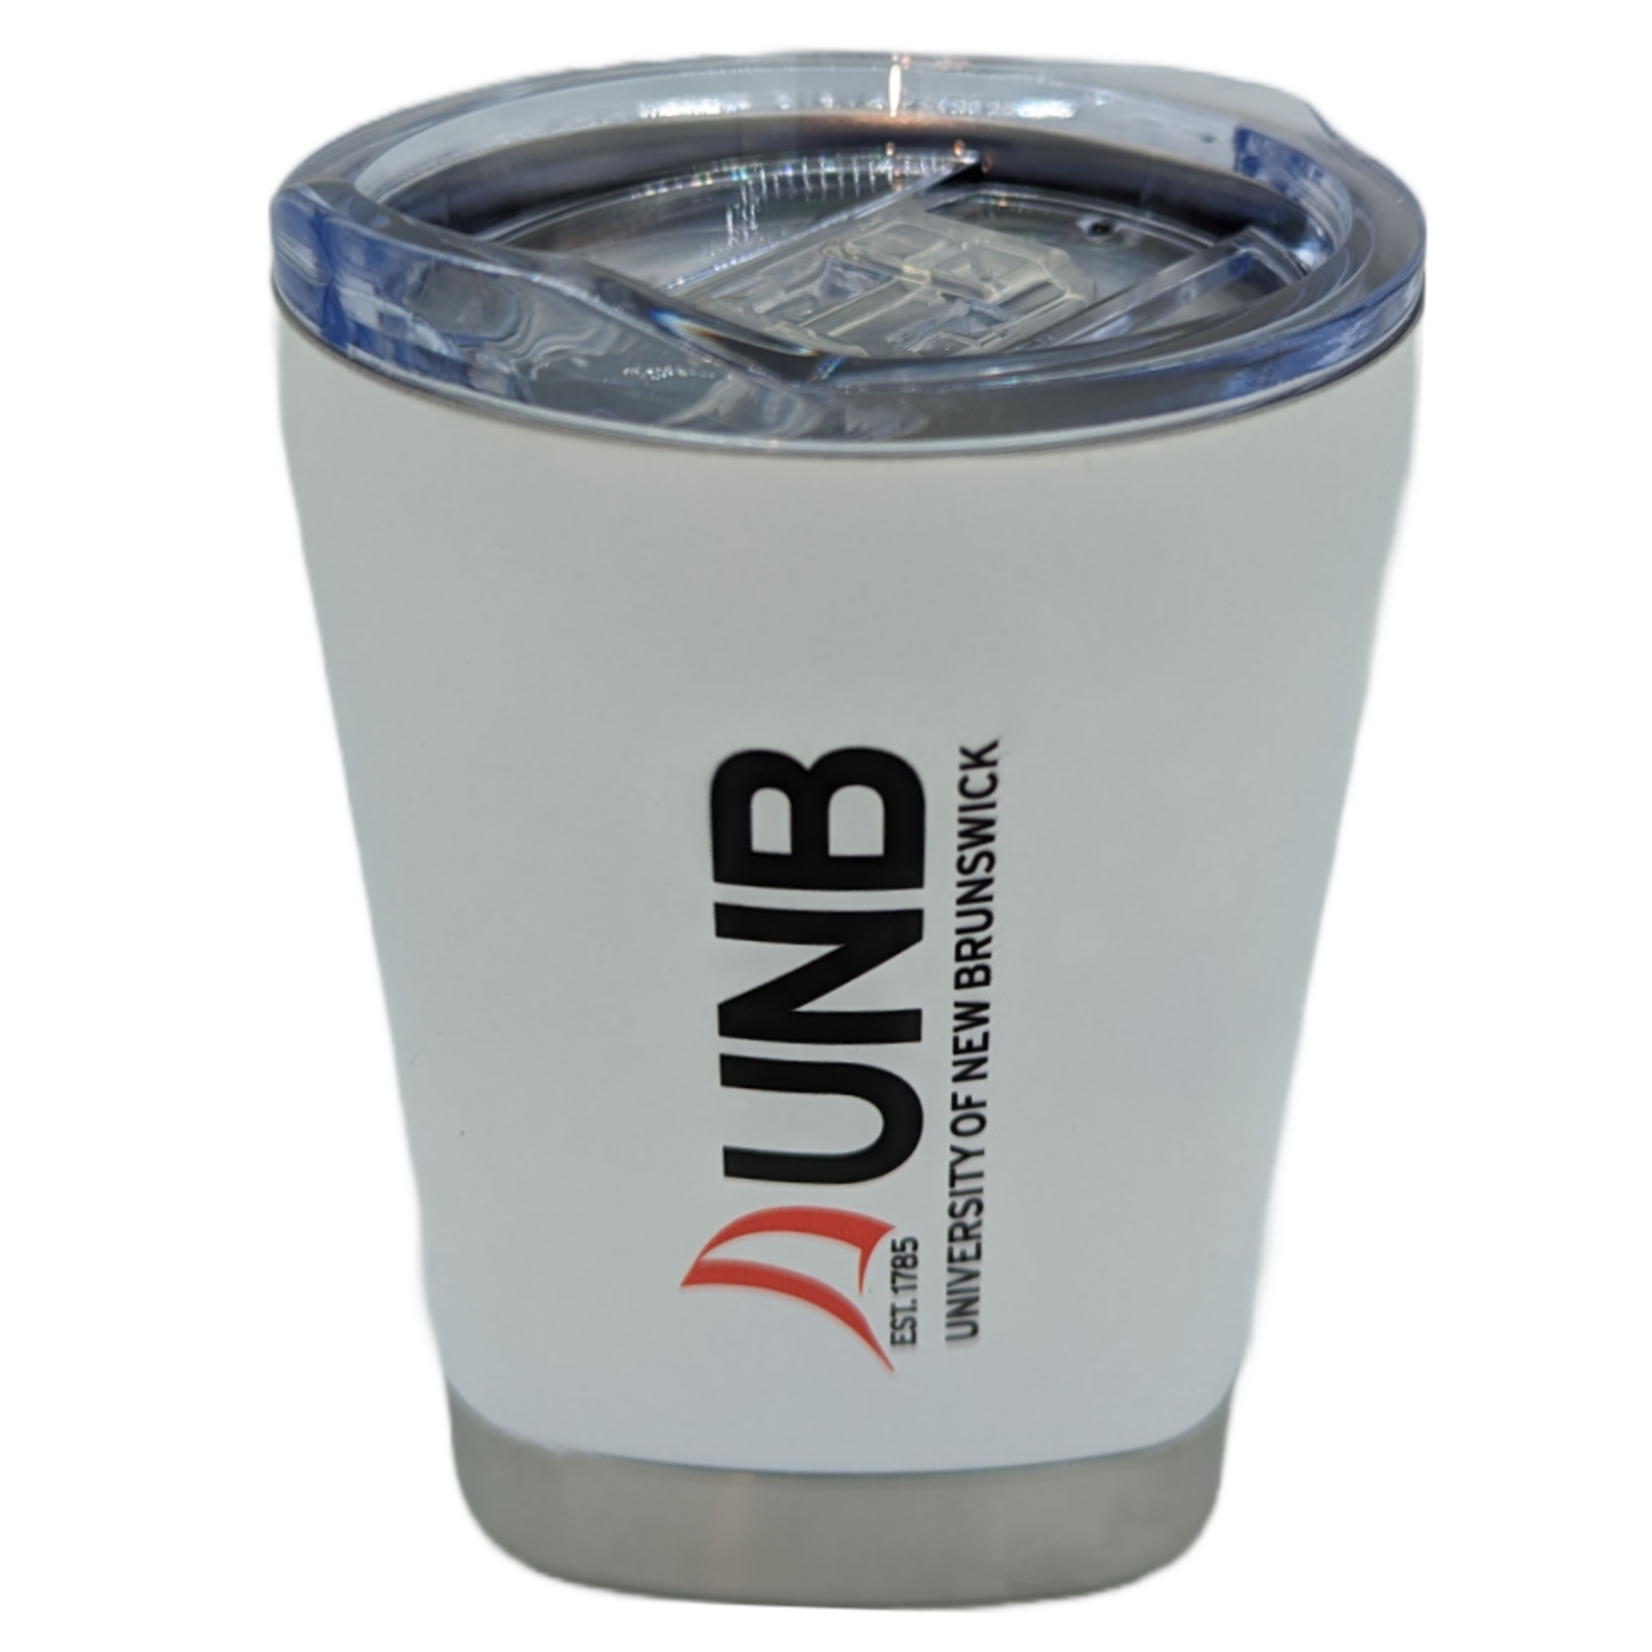 Stainless Steel Lowball Tumbler